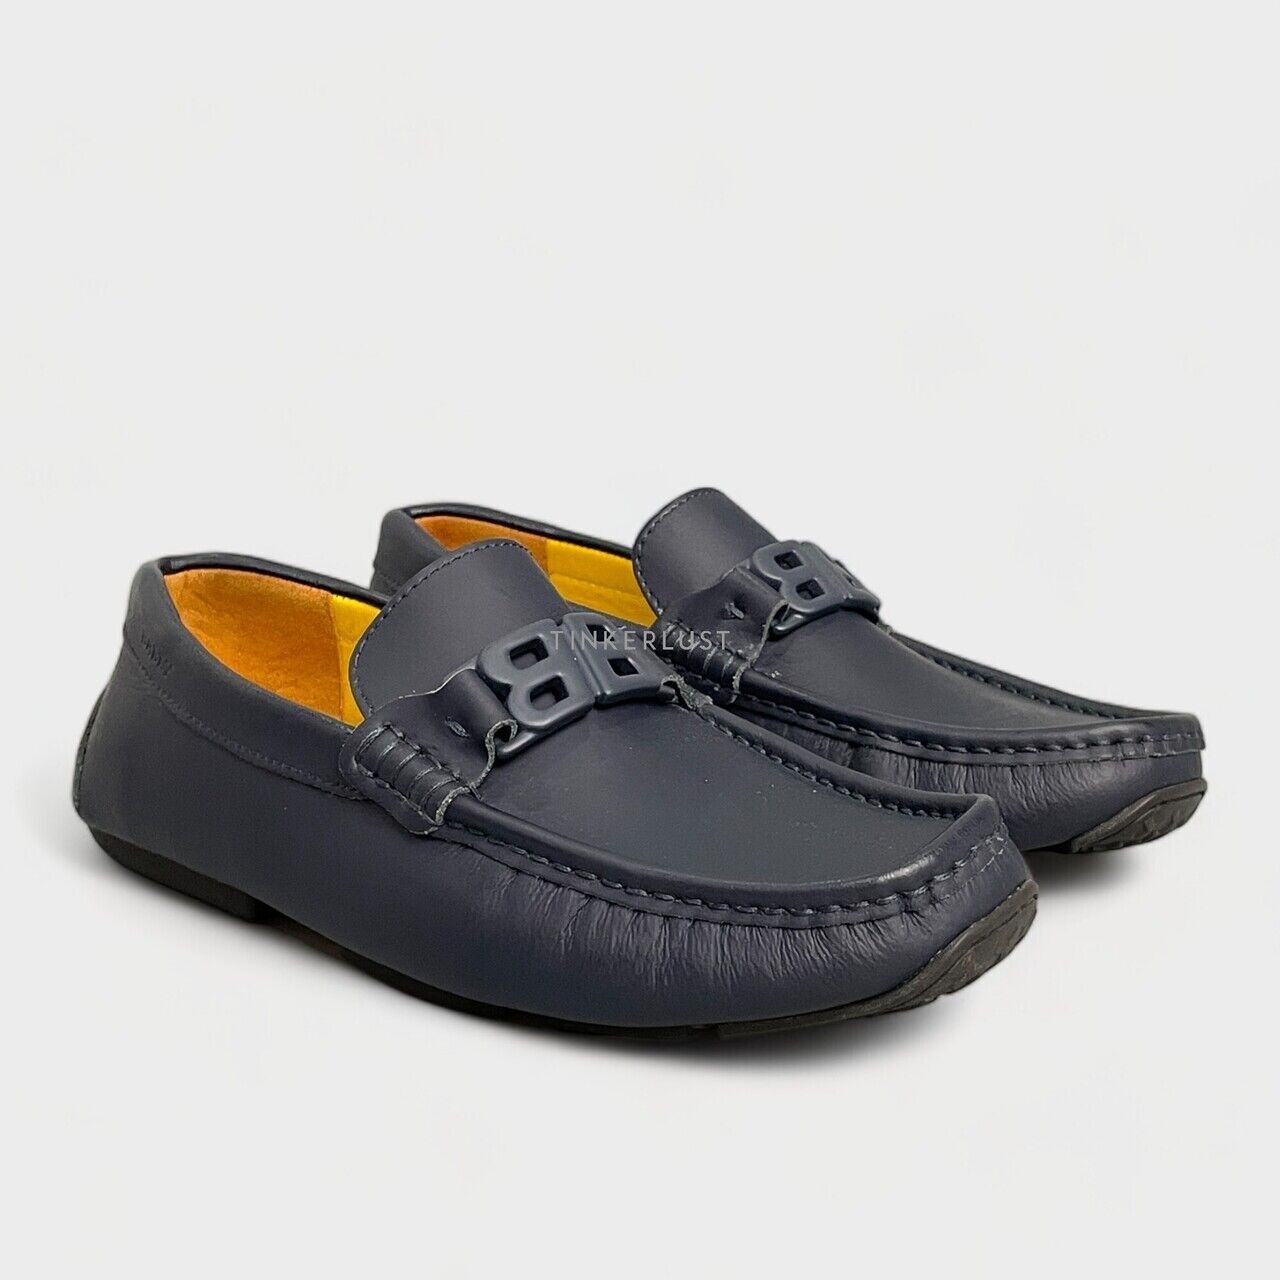 Bally Pericles Blue Leather Loafers